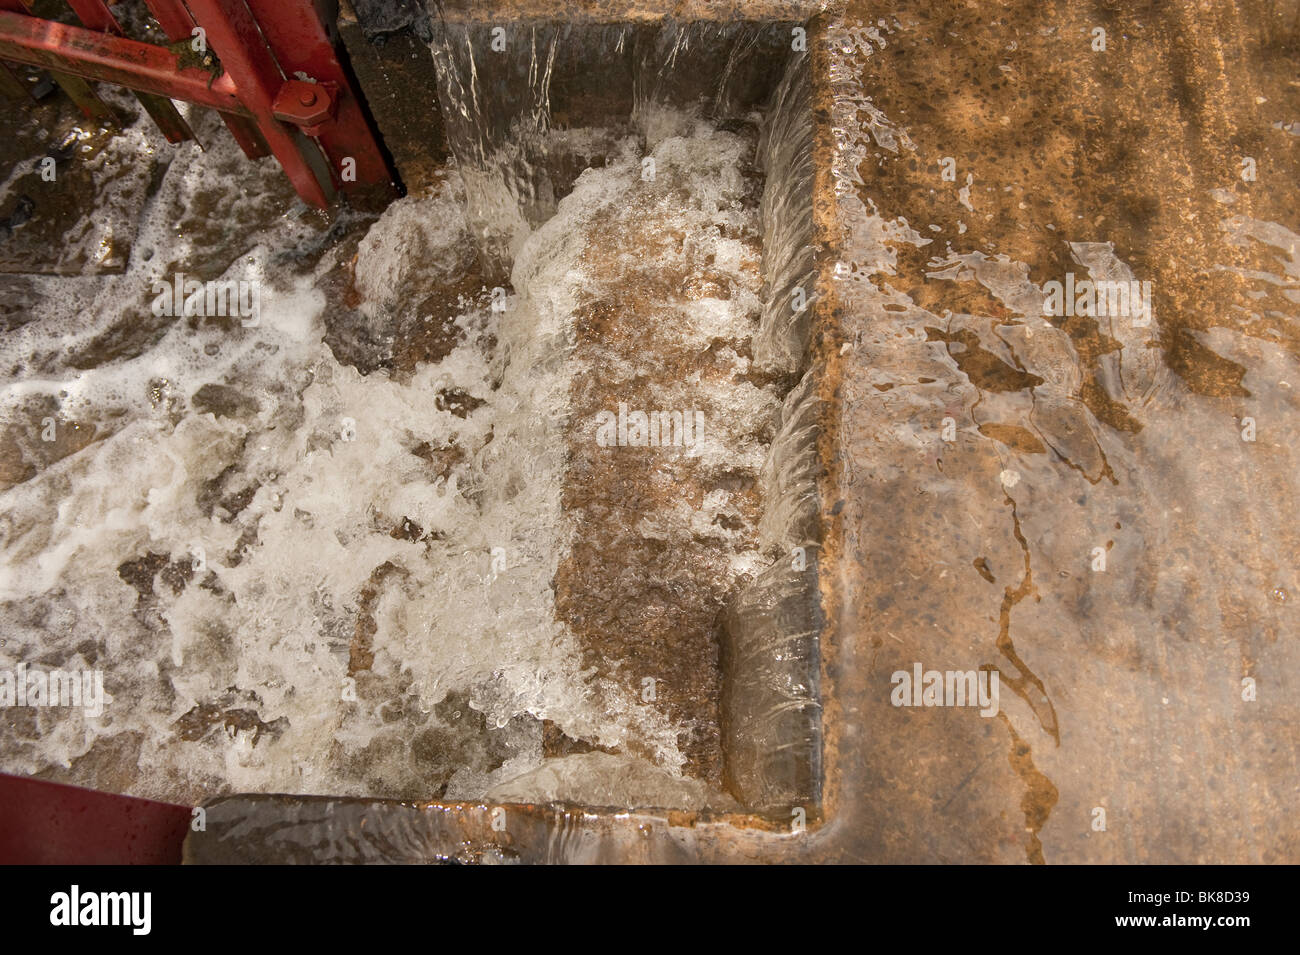 Flood water pouring down concrete steps Stock Photo